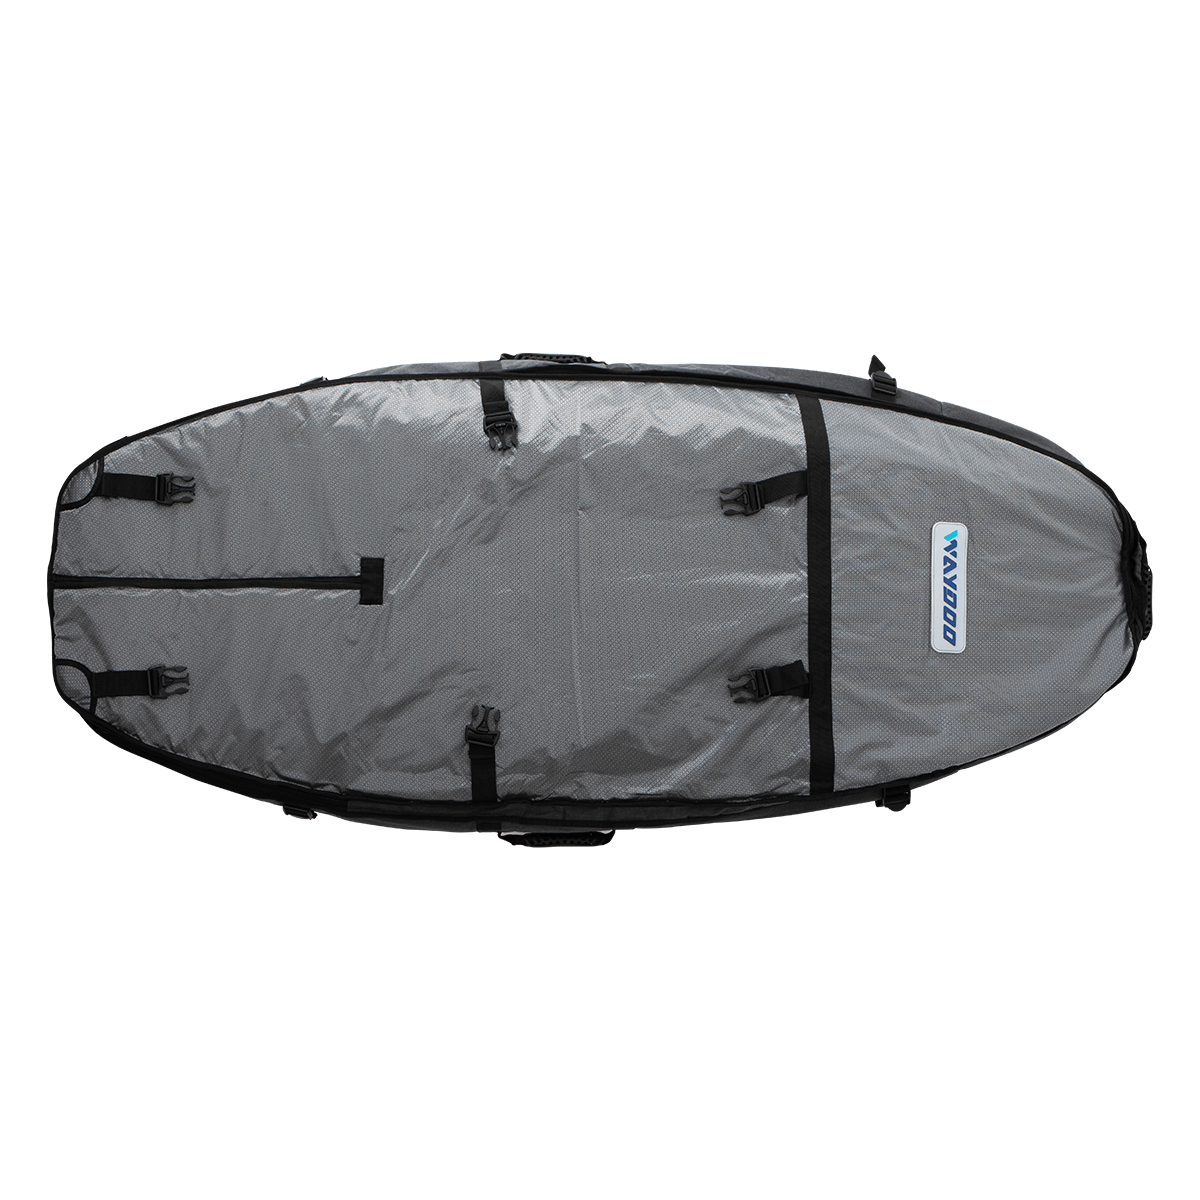 Double Travel Board Bag